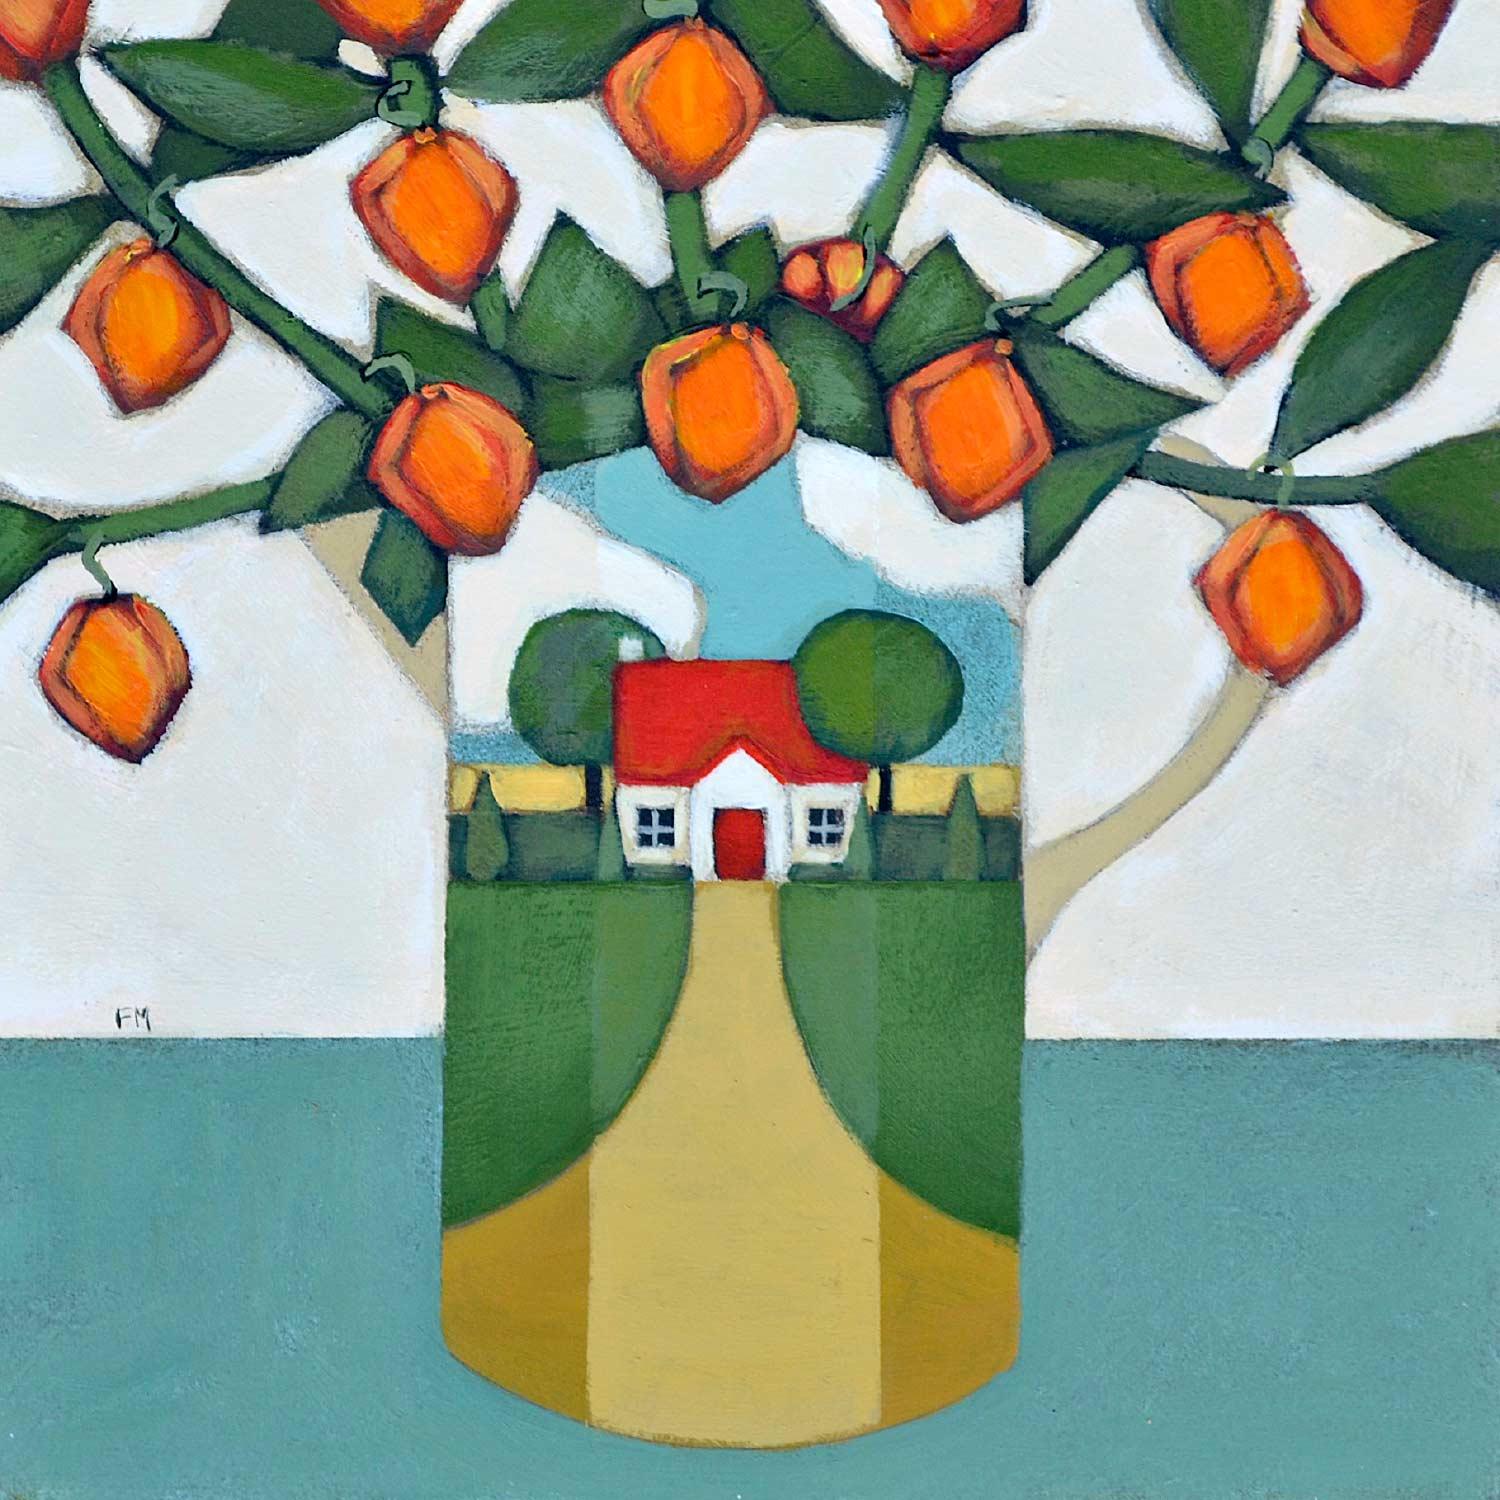 Chinese Lanterns in a Little House Jug by Fiona Millar